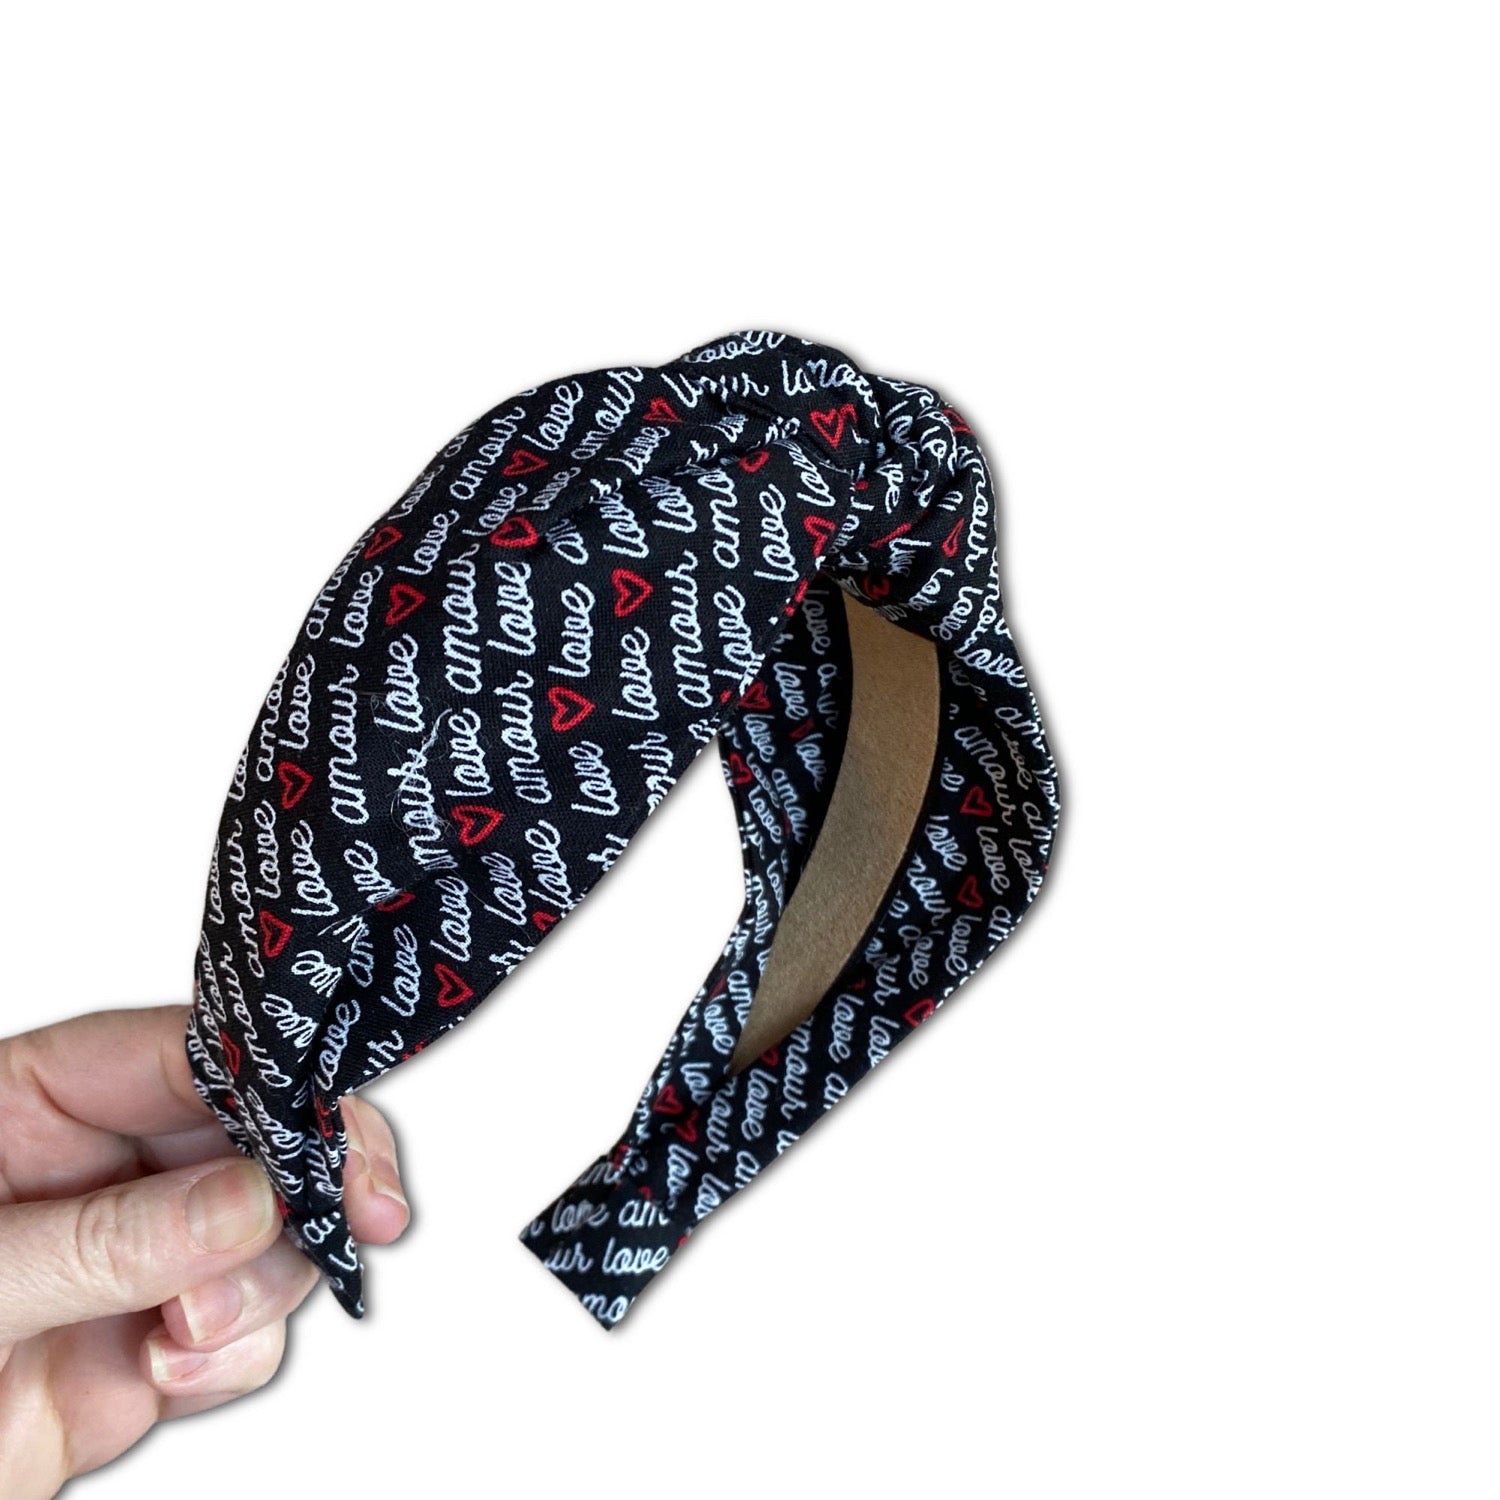 headband that features a graphic print that says "love" and "amour" with little red hearts. themed for valentines day